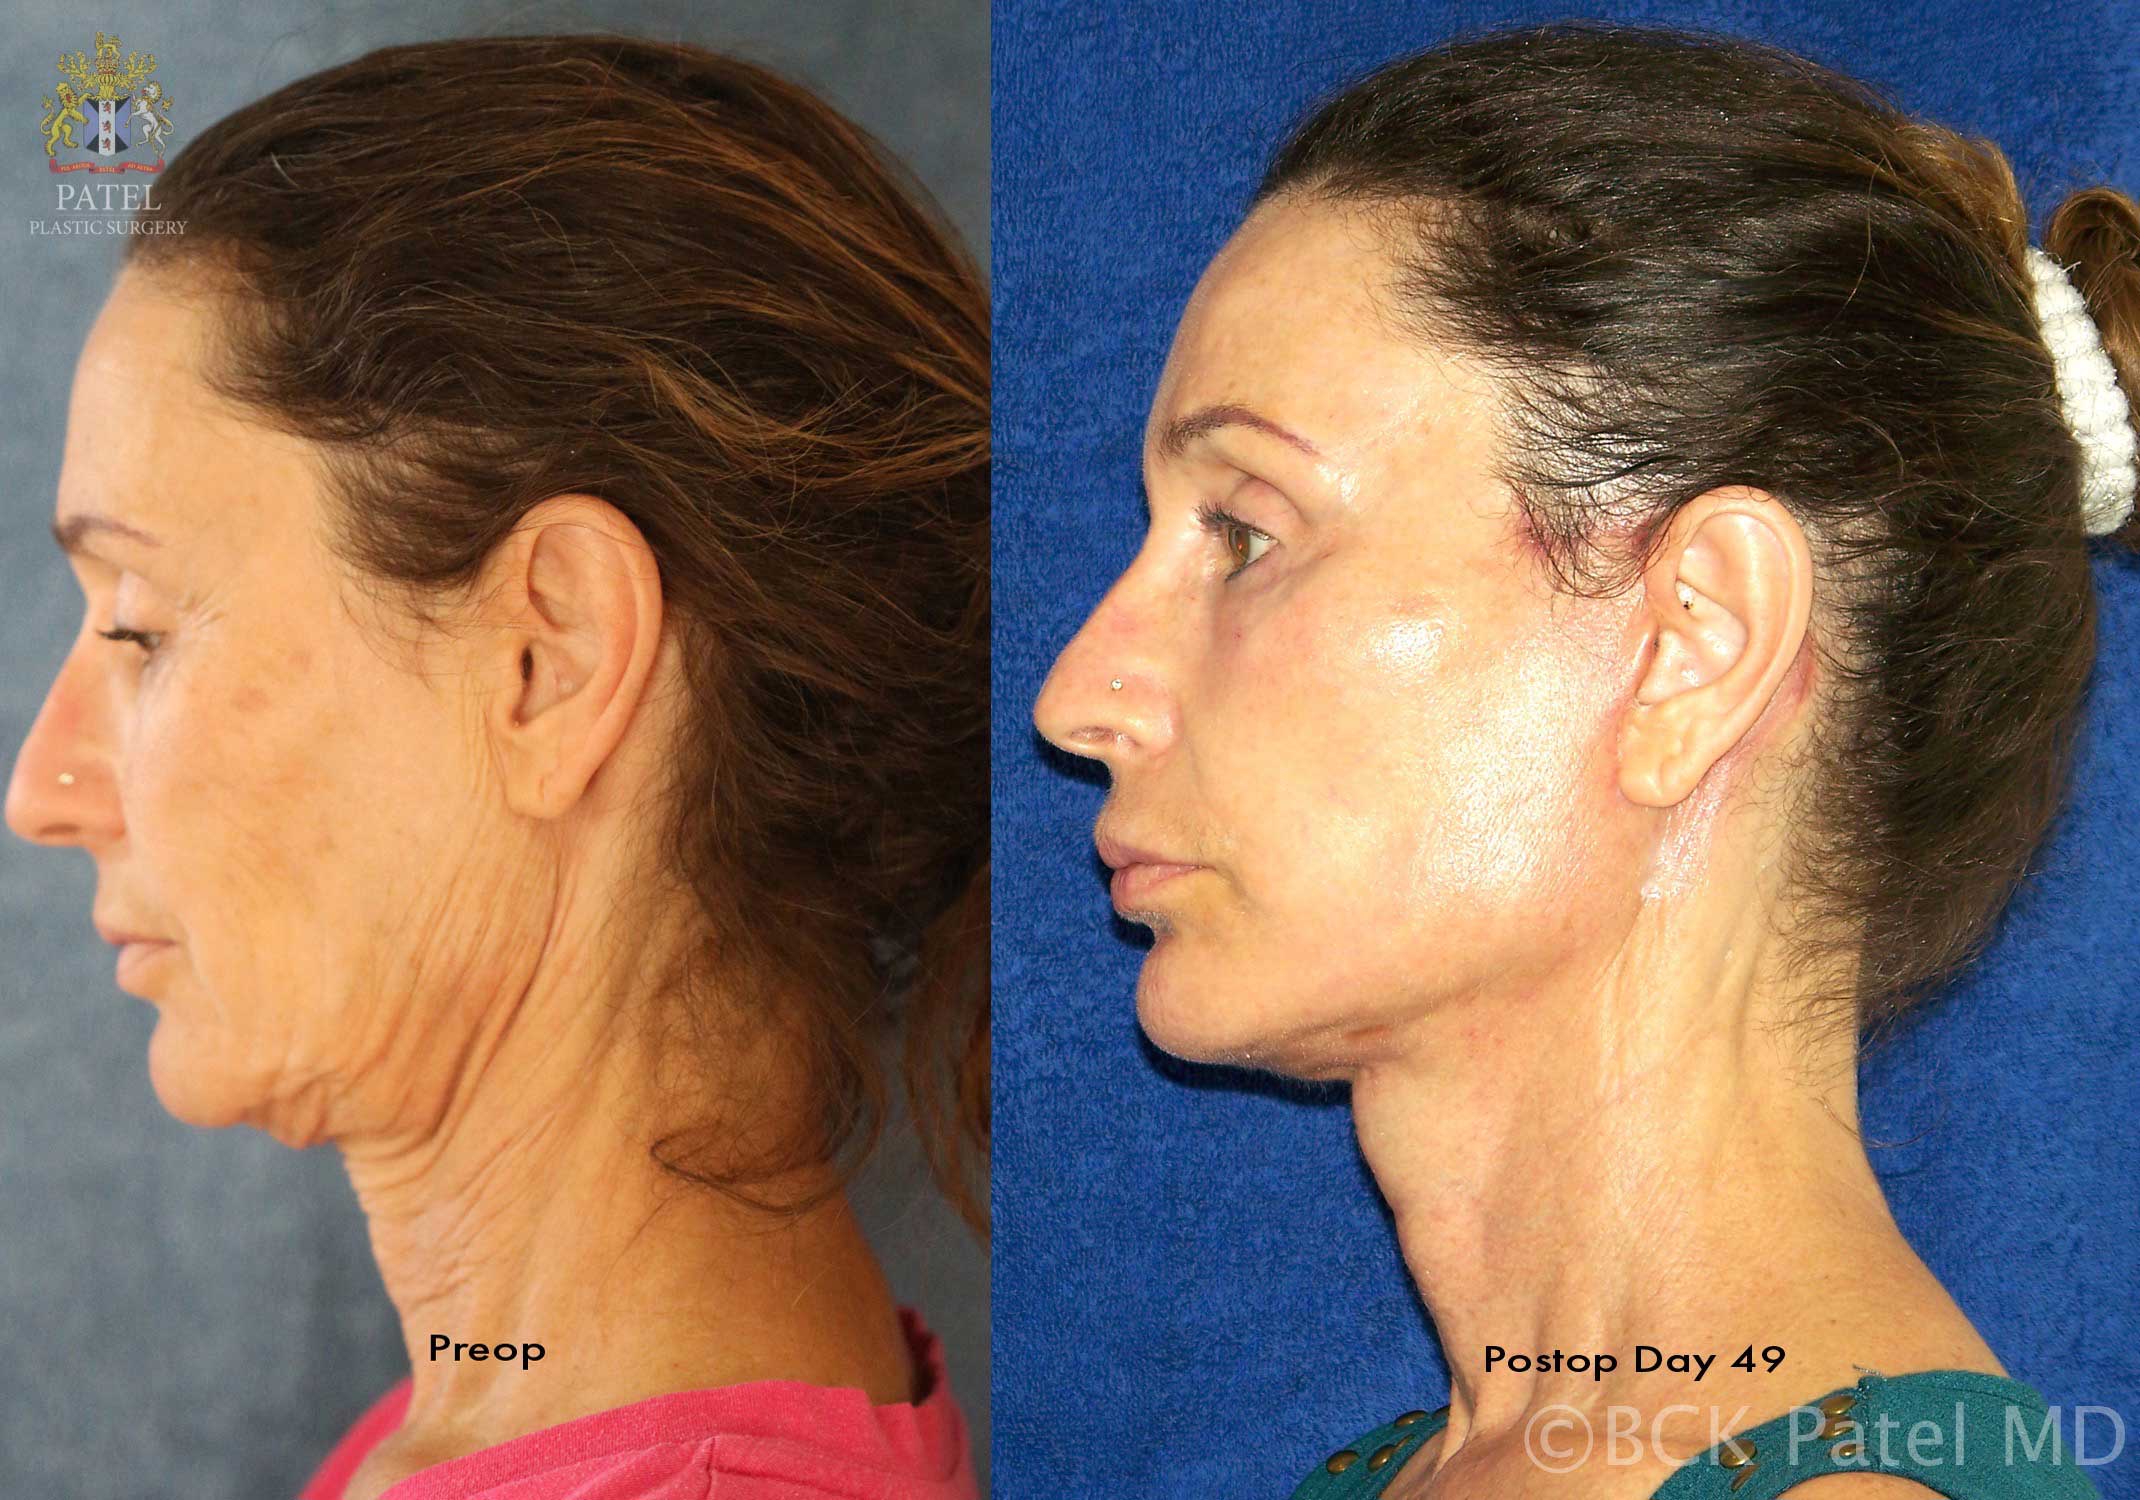 Results of a facelift and necklift 49 days after surgery performed by Dr. Bhupendra Patel of Salt Lake City, Saint George and London, England